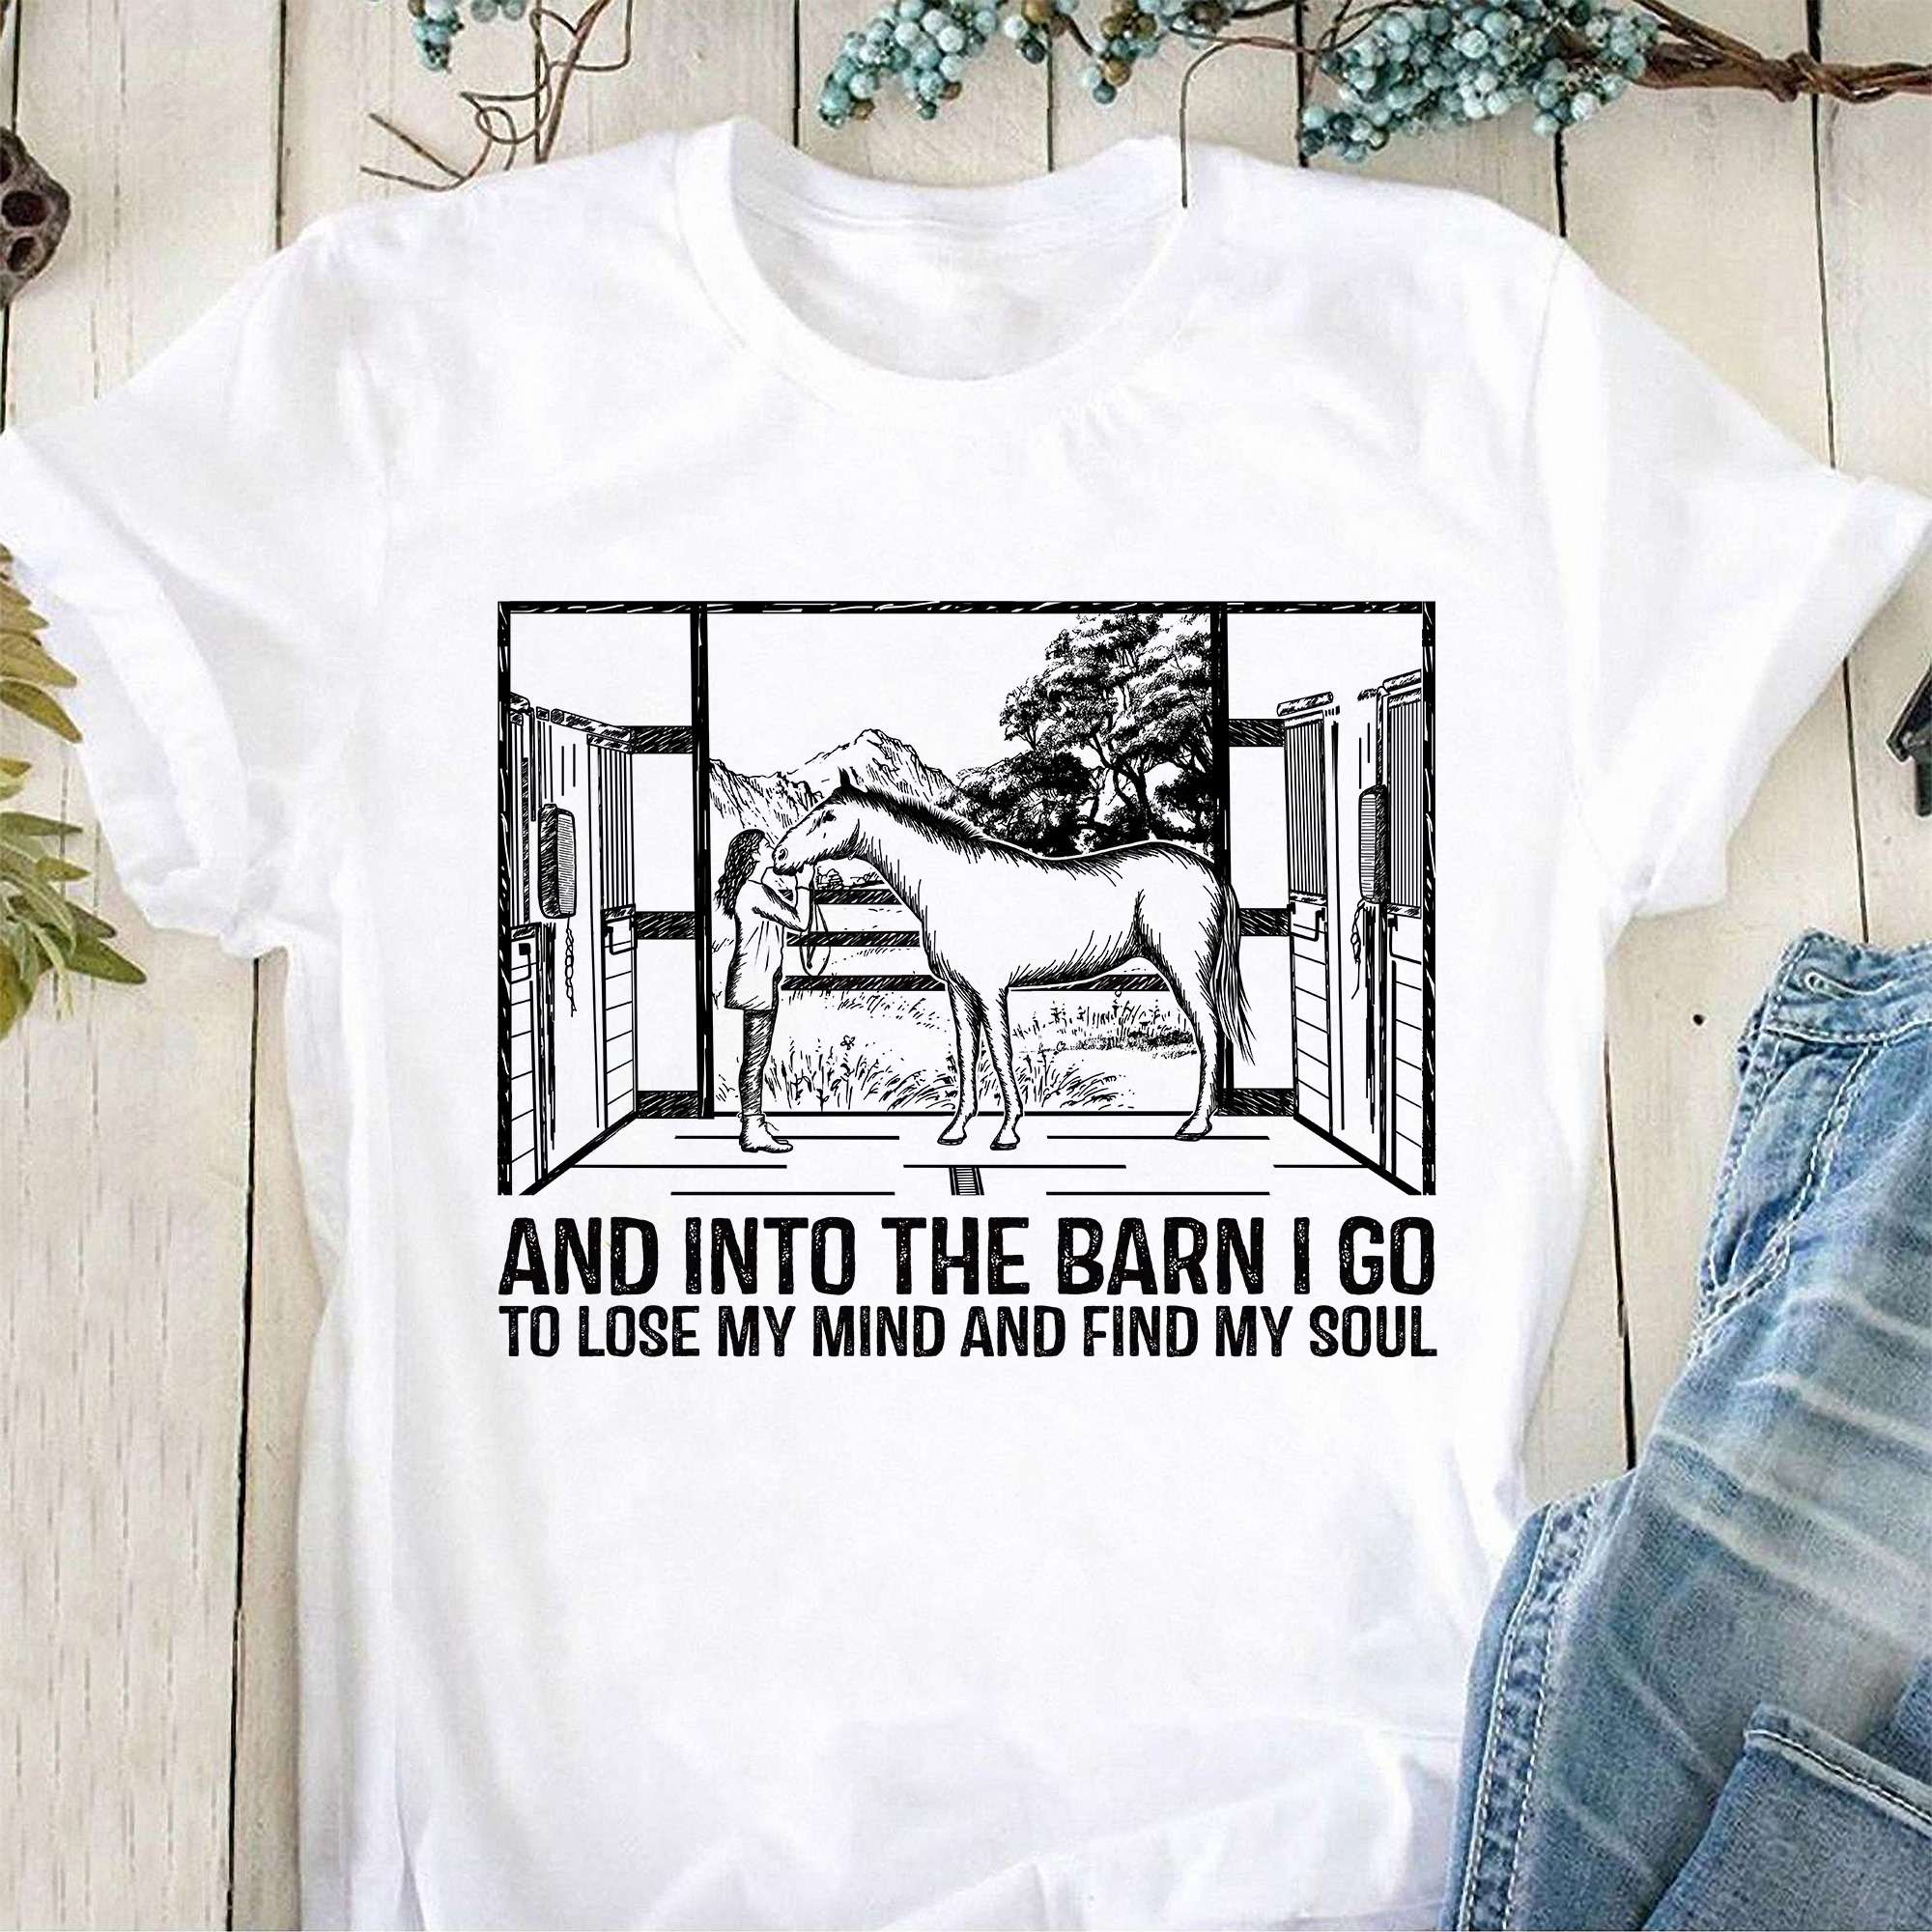 And into the barn I go to lose my mind and find my soul - Horse barn, girl loves horses